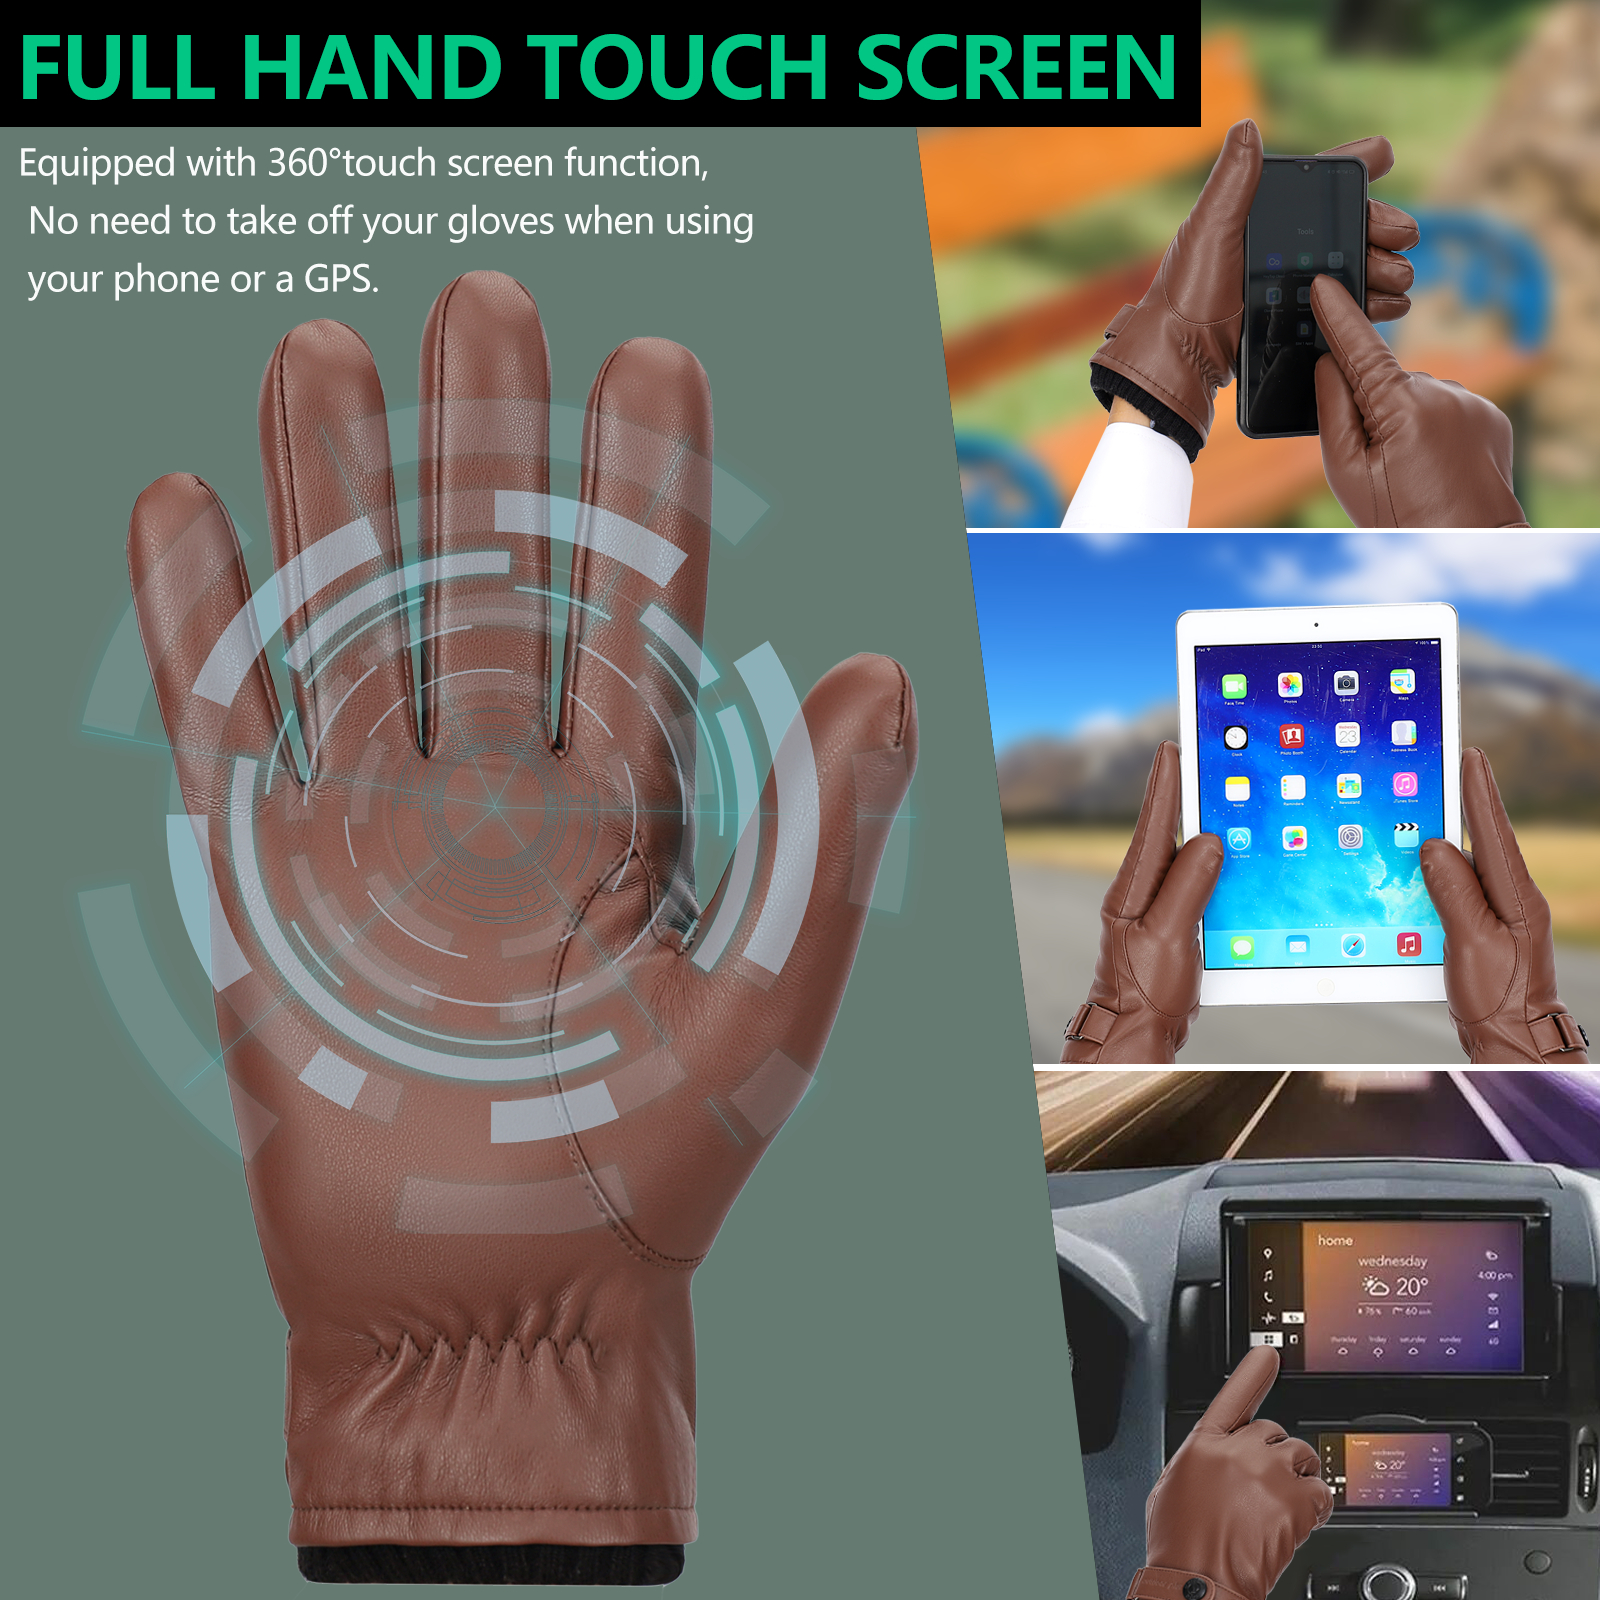 Leather Gloves for Men, Warm Wool Lined PU Leather Winter Gloves Touchscreen Texting,Driving Gloves Men Waterproof - image 3 of 5